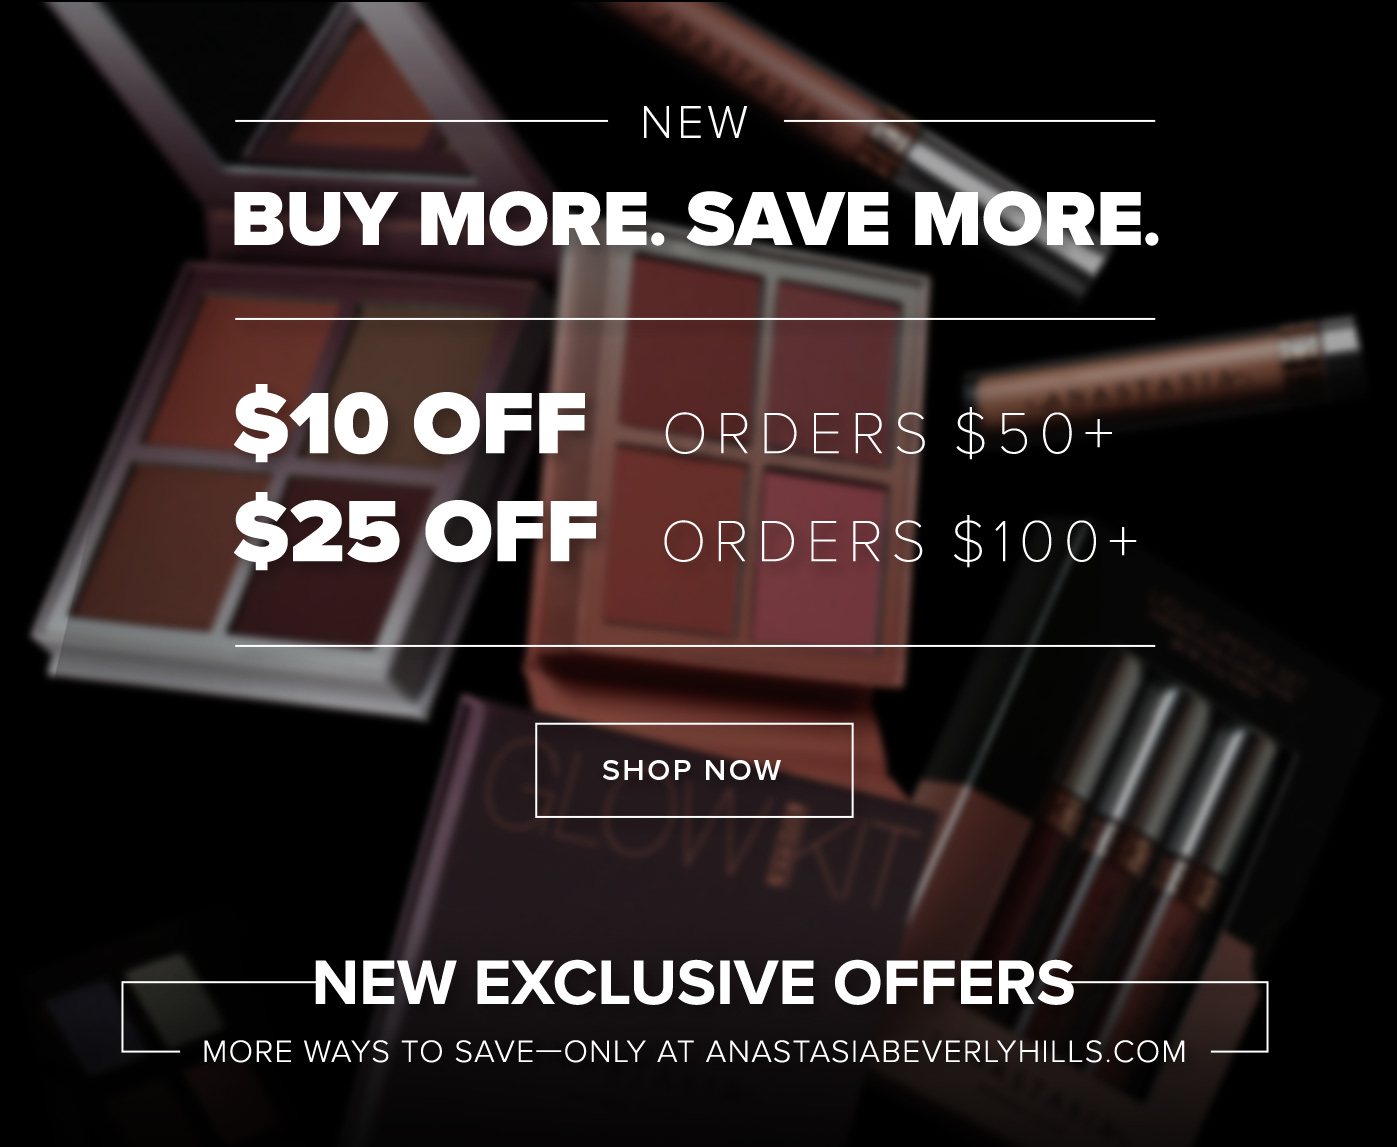  NEW Buy More. Save More. $10 off orders $50+ $25 off orders $100